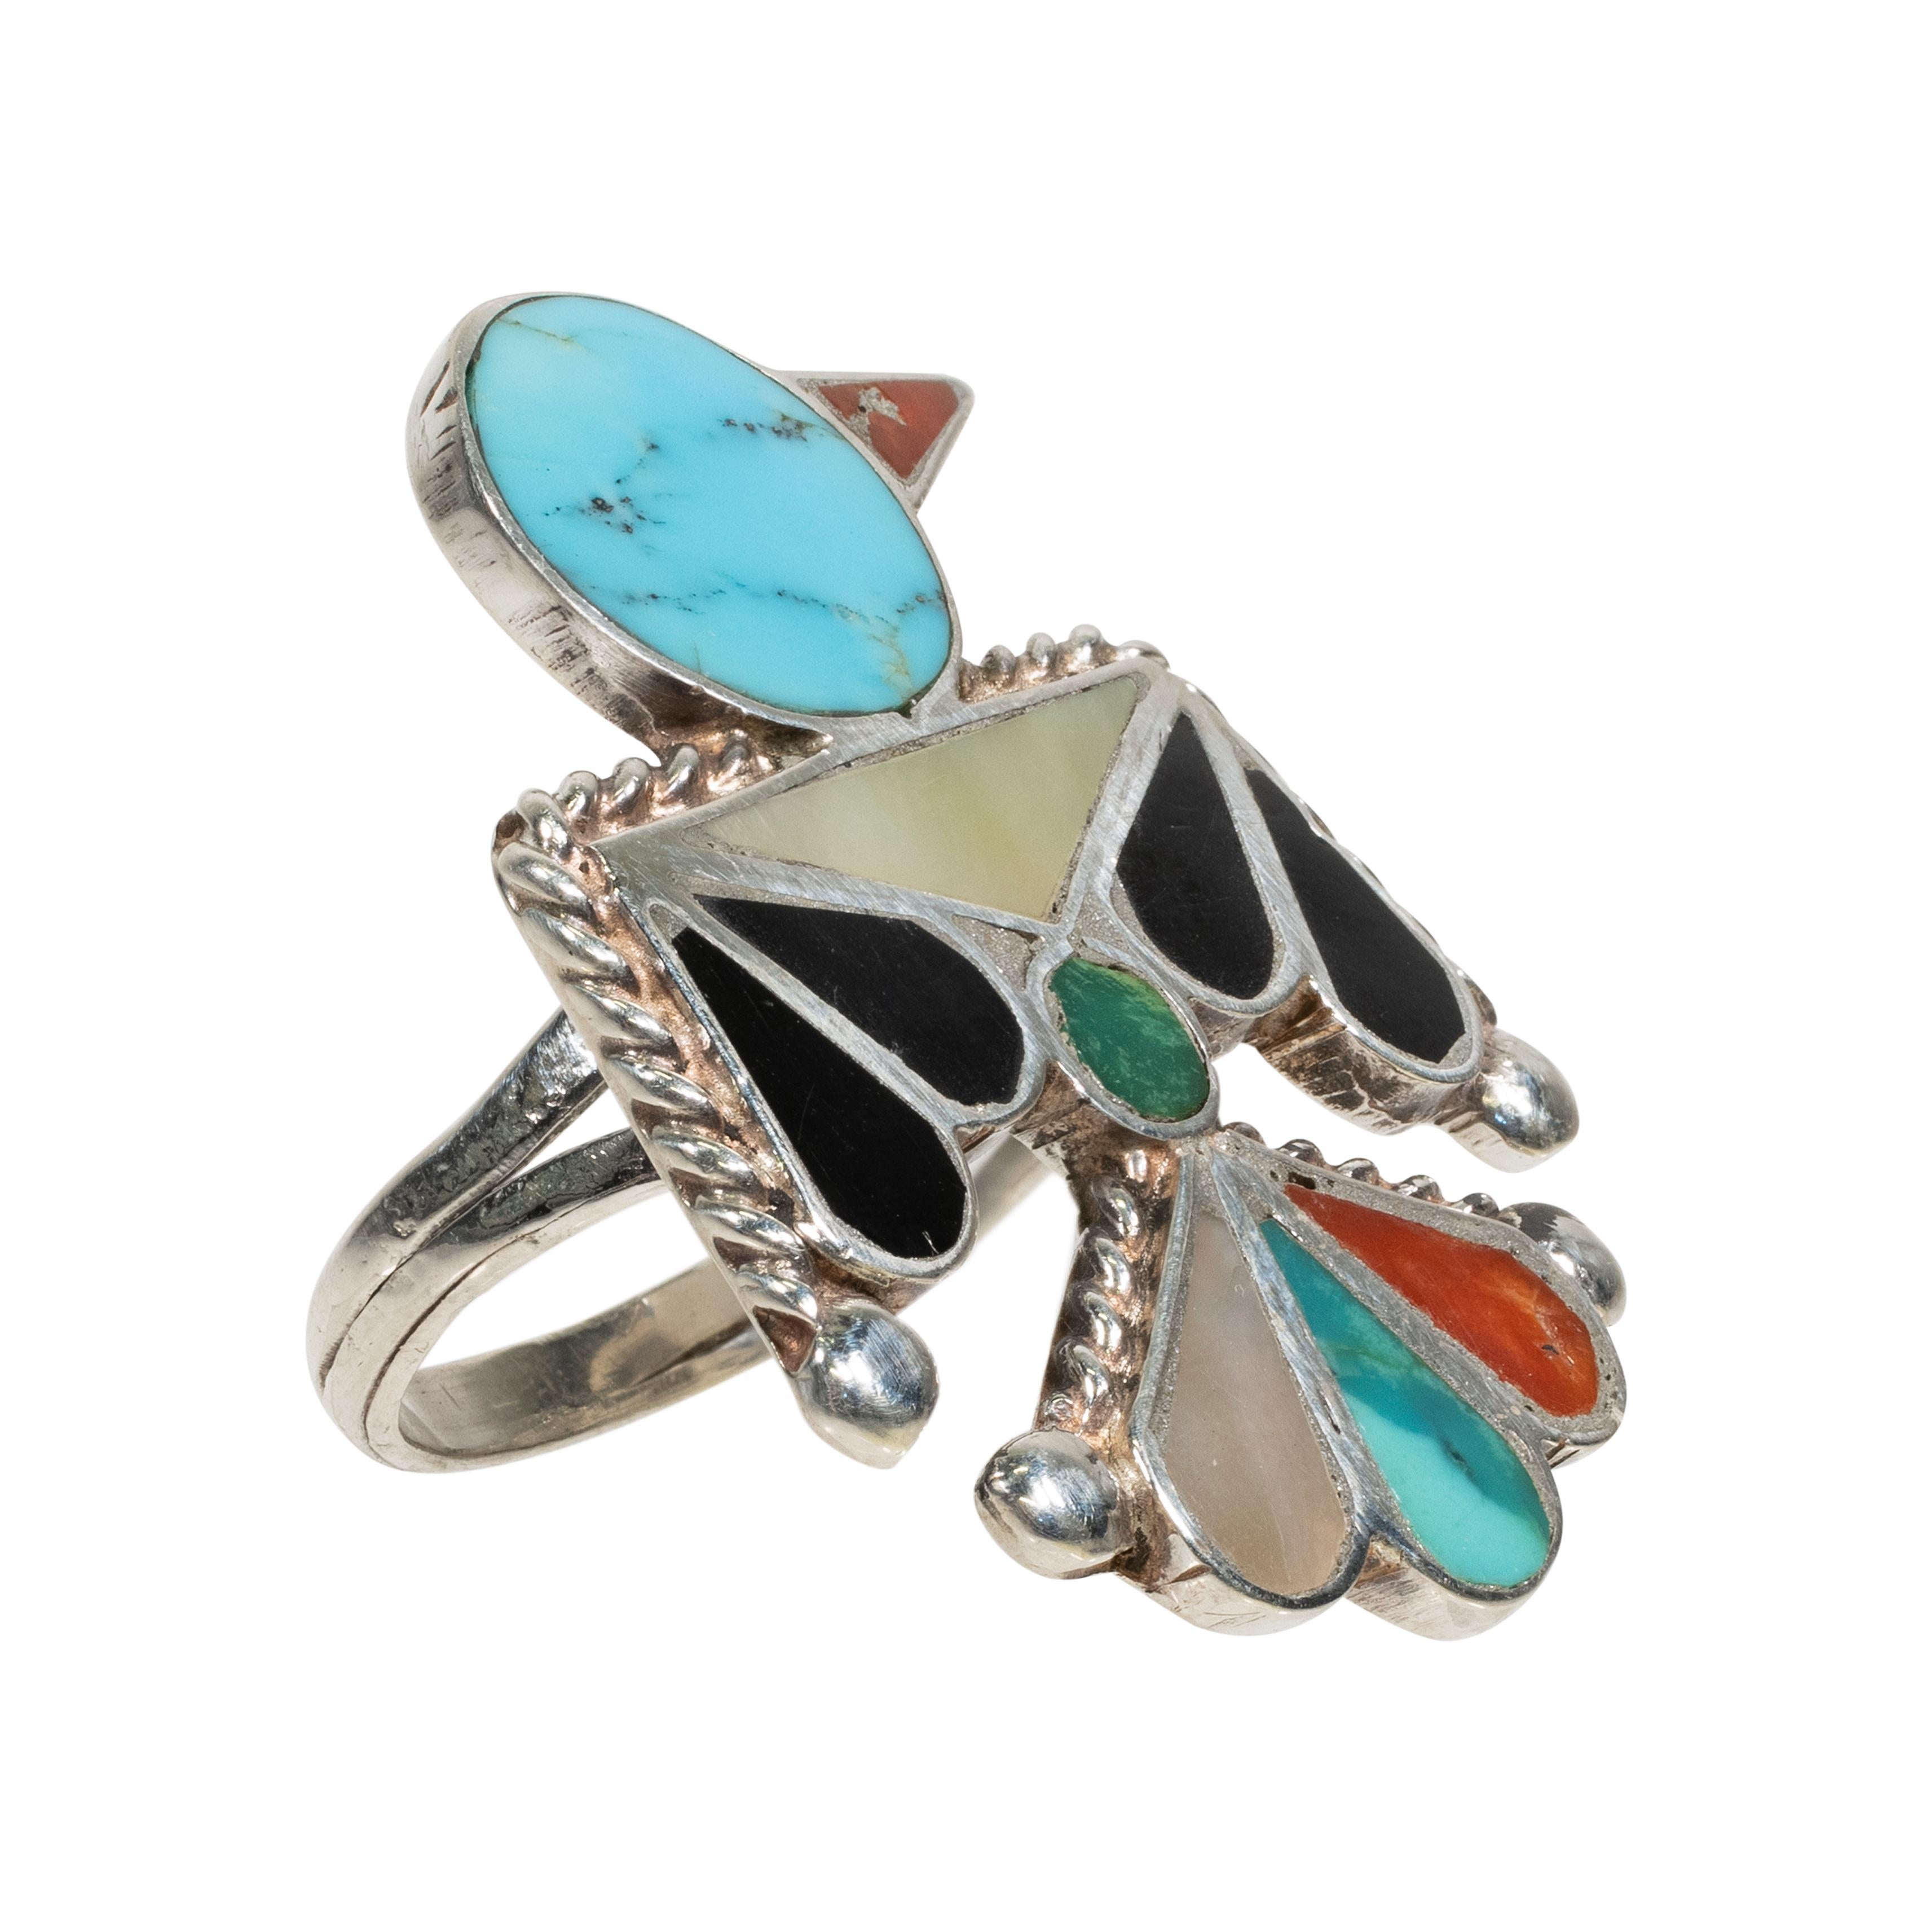 Zuni thunderbird ring with inlaid turquoise, onyx, coral and mother of pearl.

PERIOD: After 1950
ORIGIN: Zuni
SIZE: Size 6.5; 1 1/2